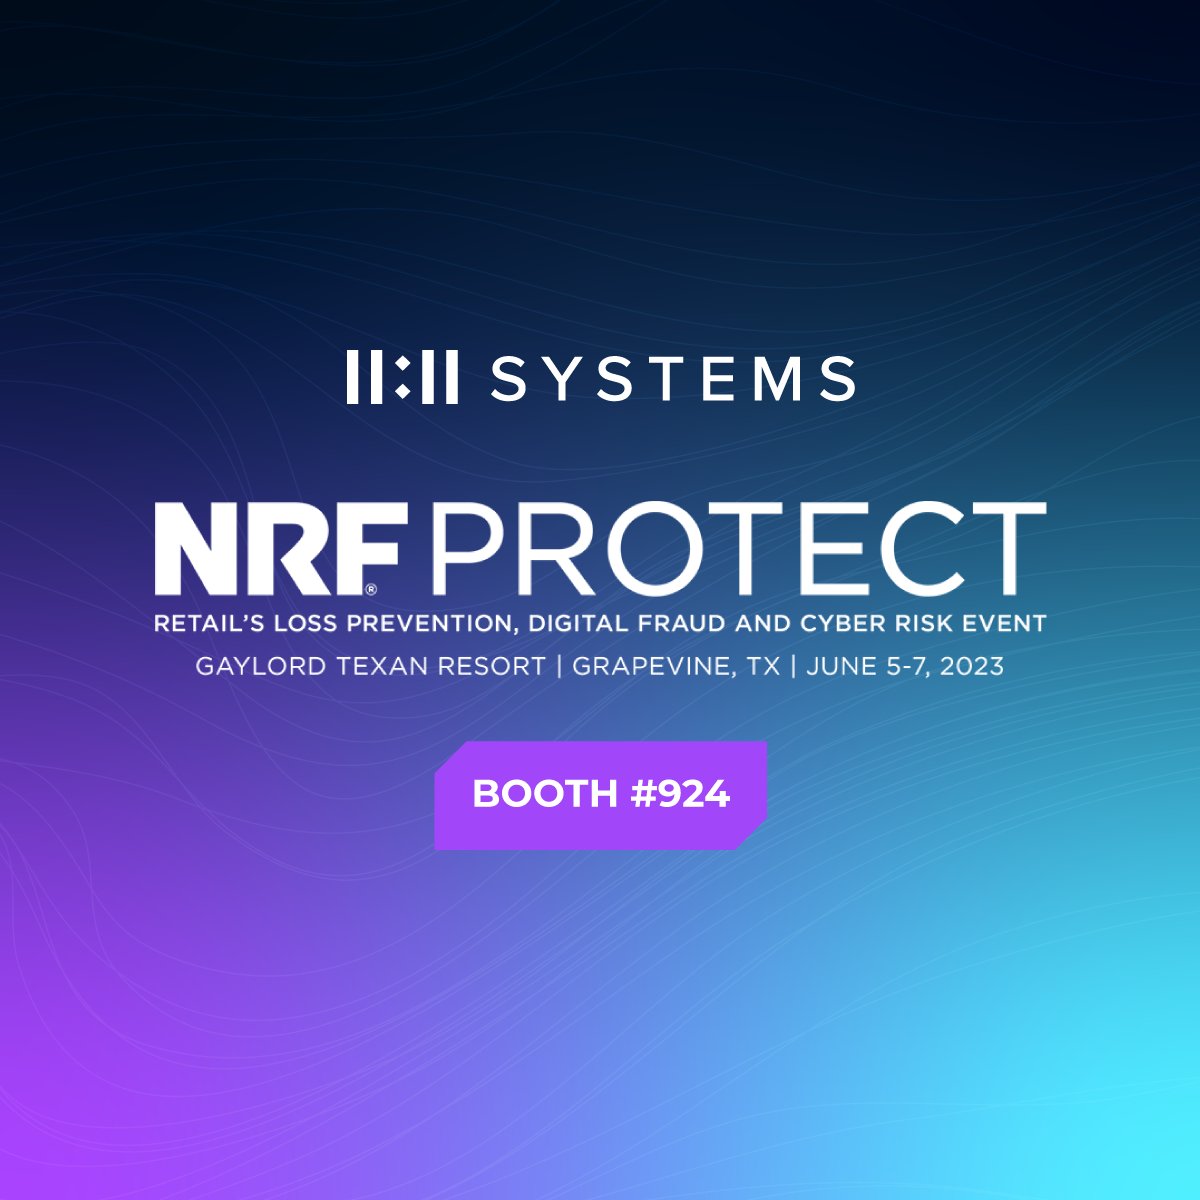 Join us as we address new strategies to fight changing threats, identify top #retailsecurity priorities and discover new tools at #NRFPROTECT! Will we see you there? Stop by booth 924 to say hello to the 11:11 Systems team.